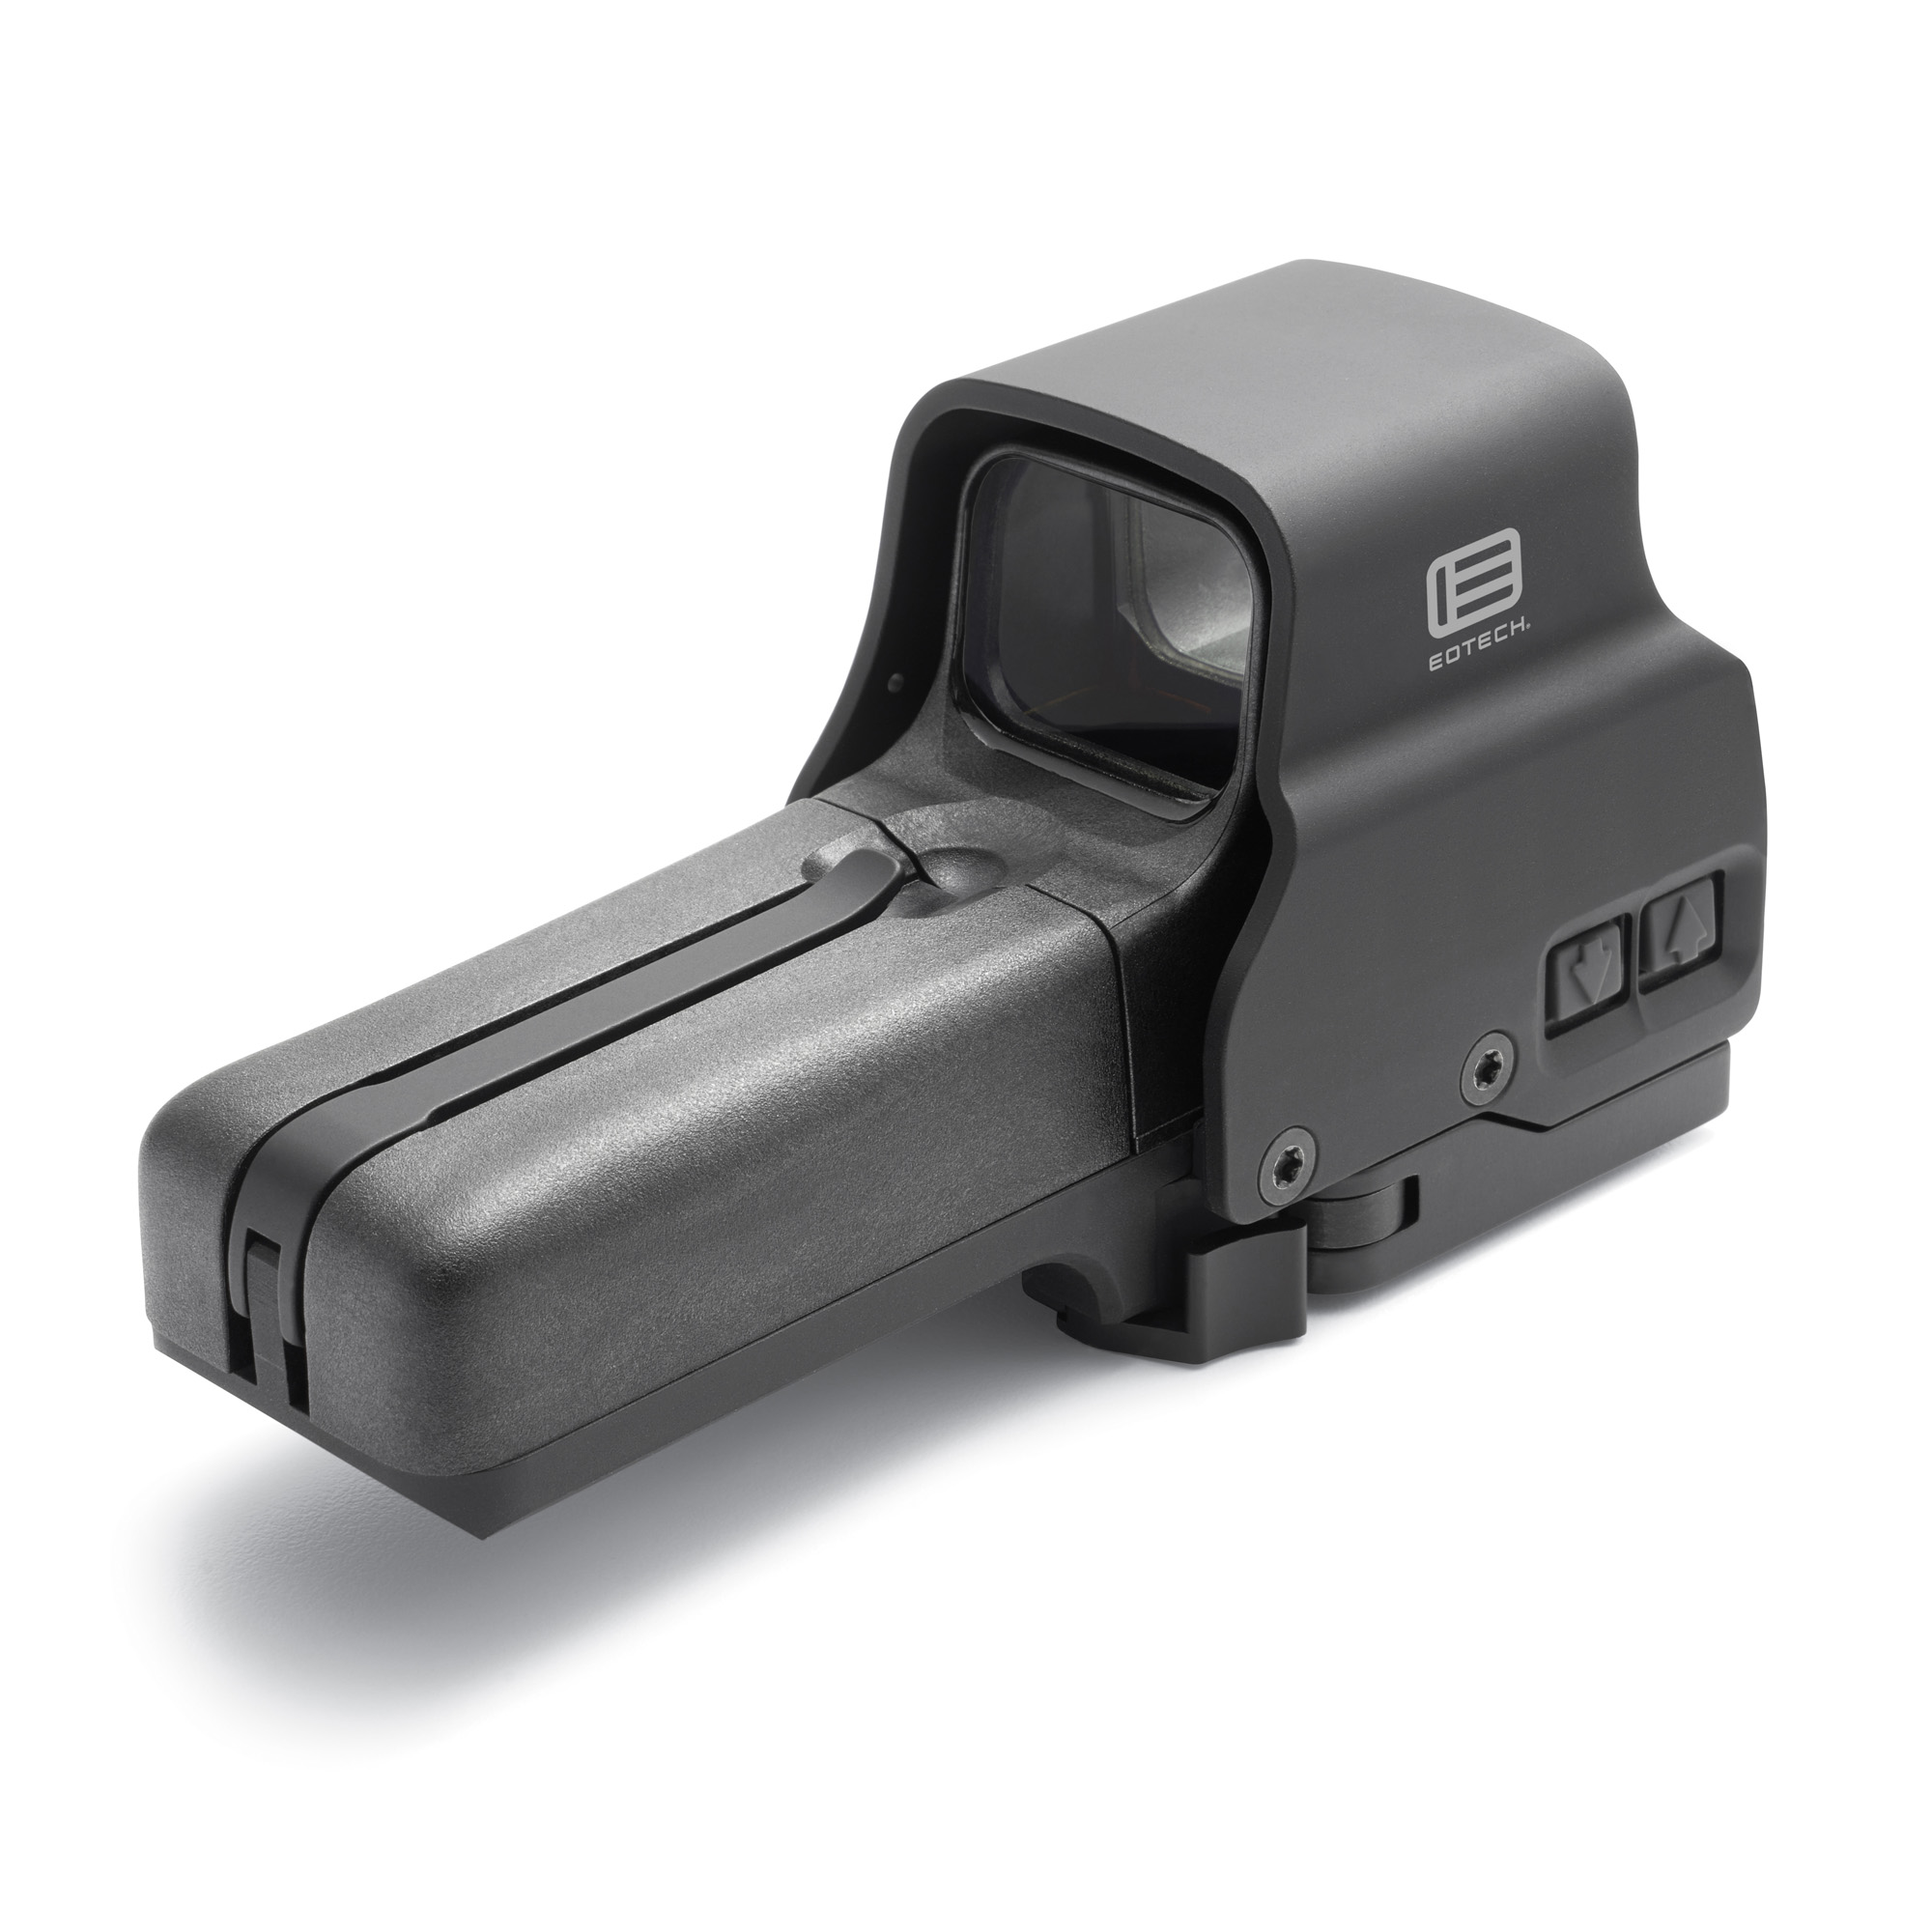 EOTECH 518 Holographic Weapon Sight, Red 68MOA Ring with 1-MOA Dot Reticle, QD Mount, Side Button Controls, Black (518.A65)